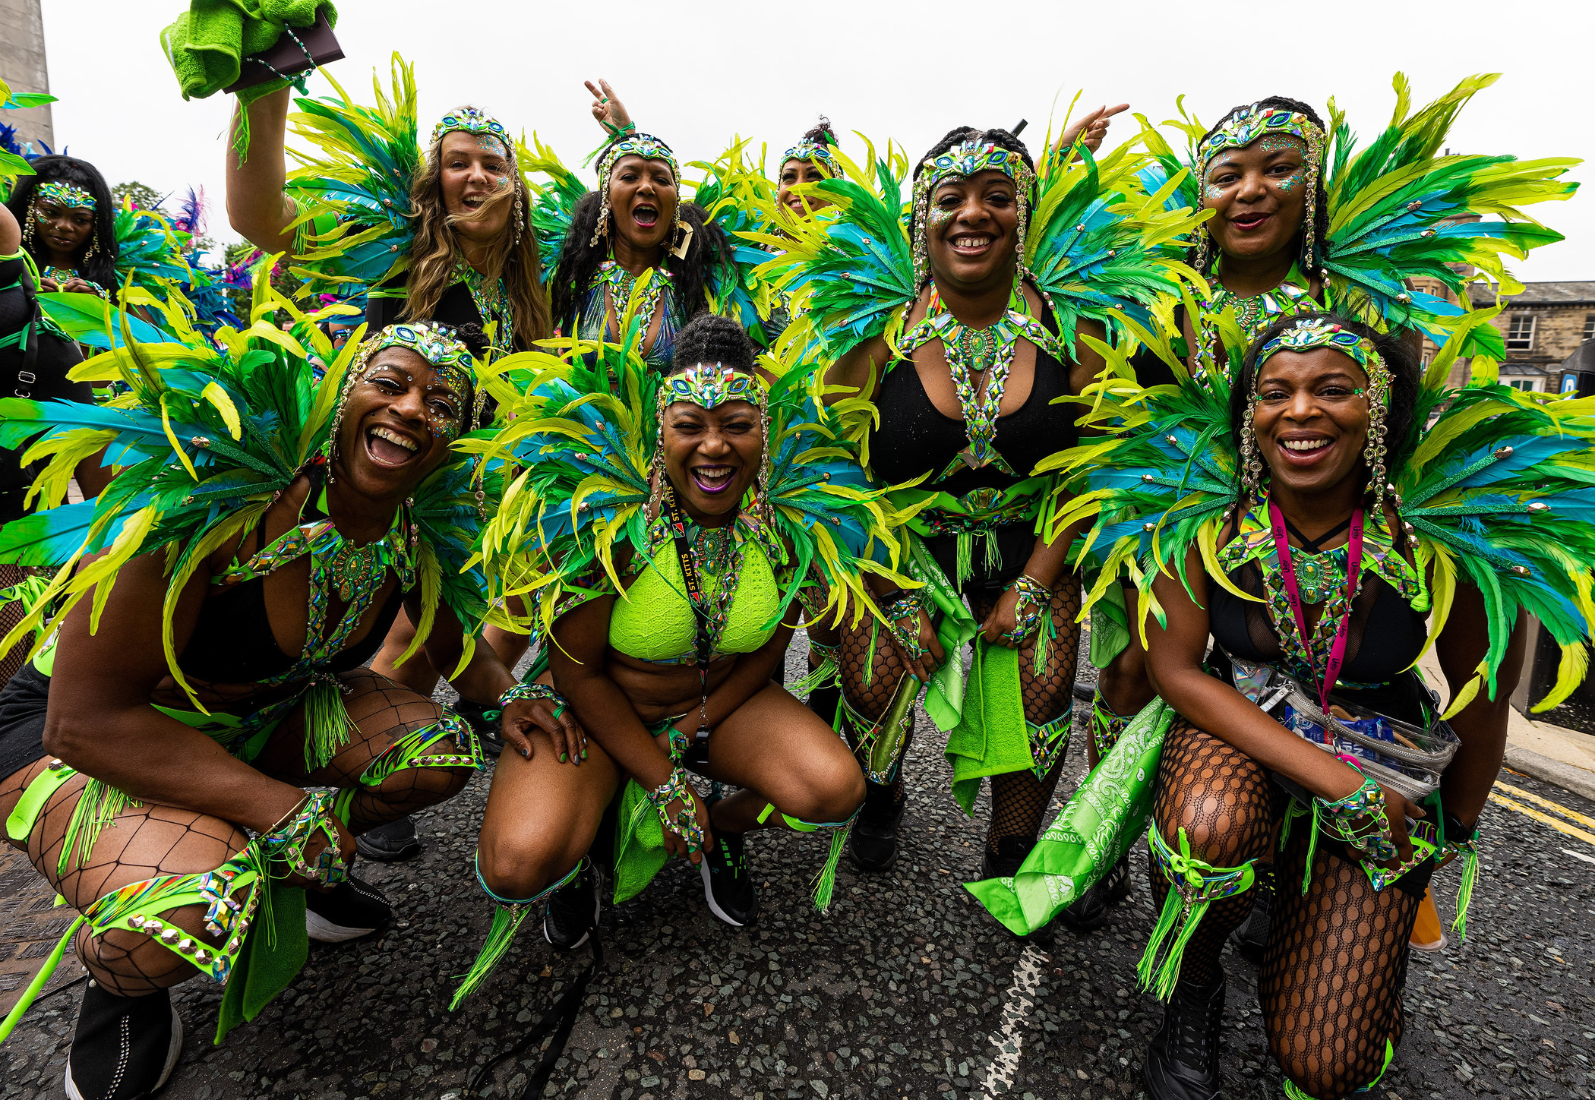 Leeds West Indian Carnival will perform at Harrogate Carnival